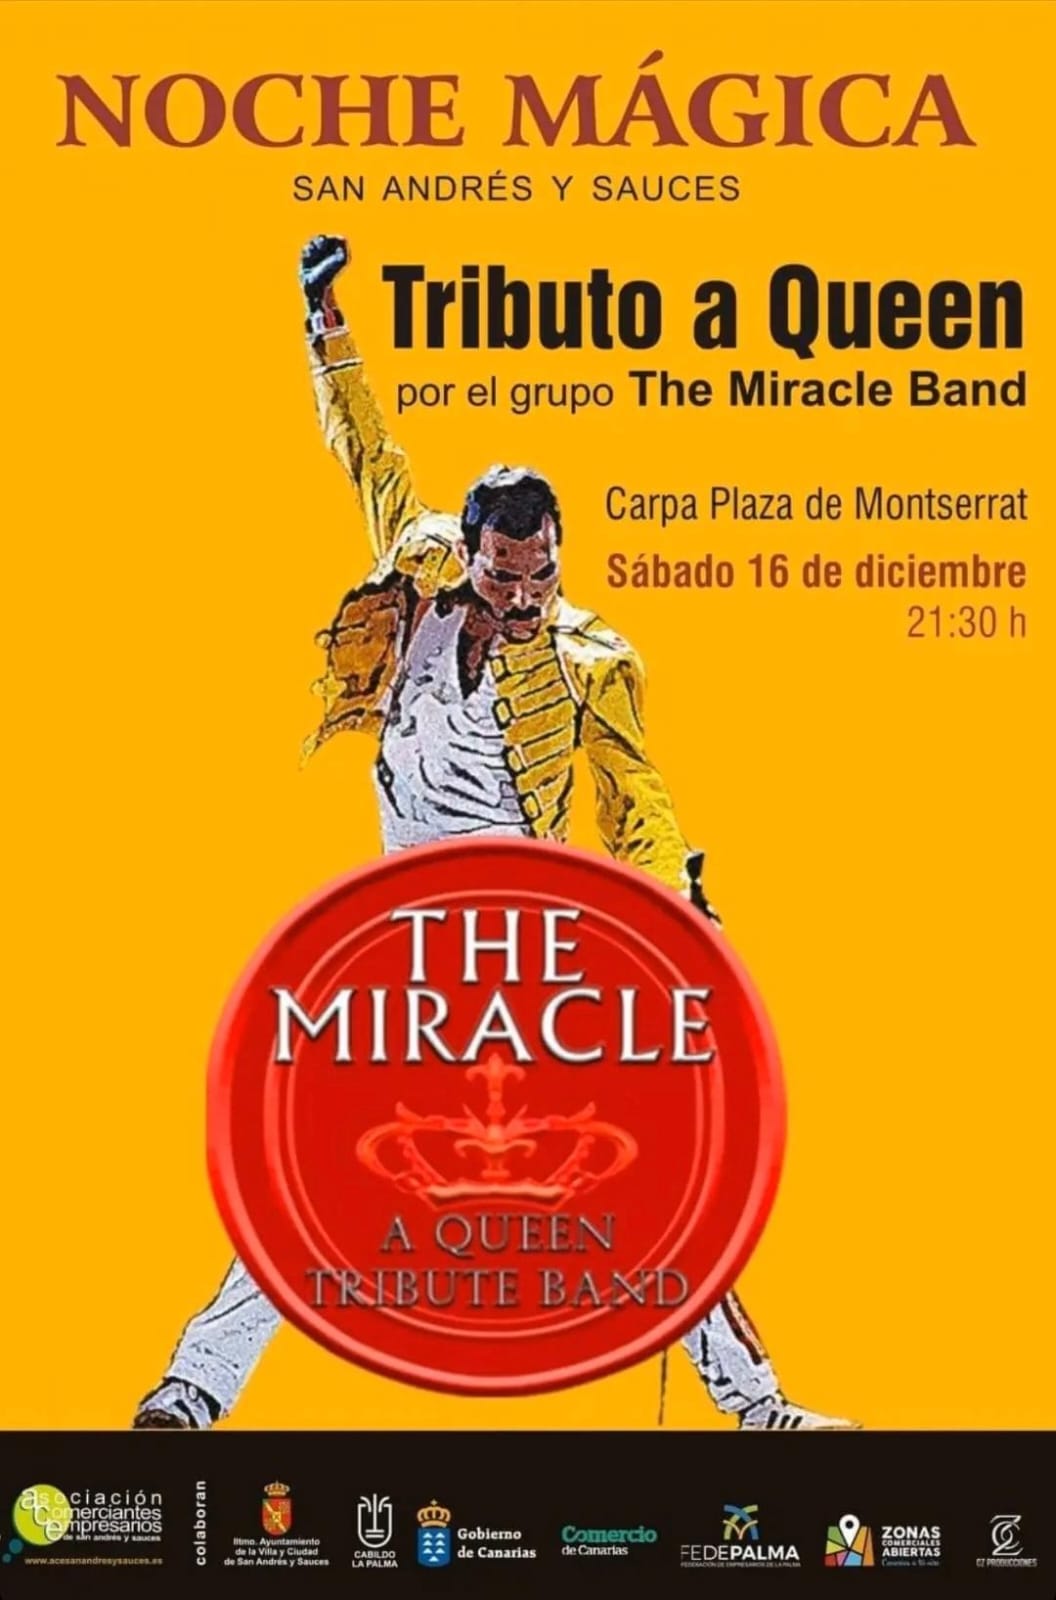 Tributo a Queen con The Miracle